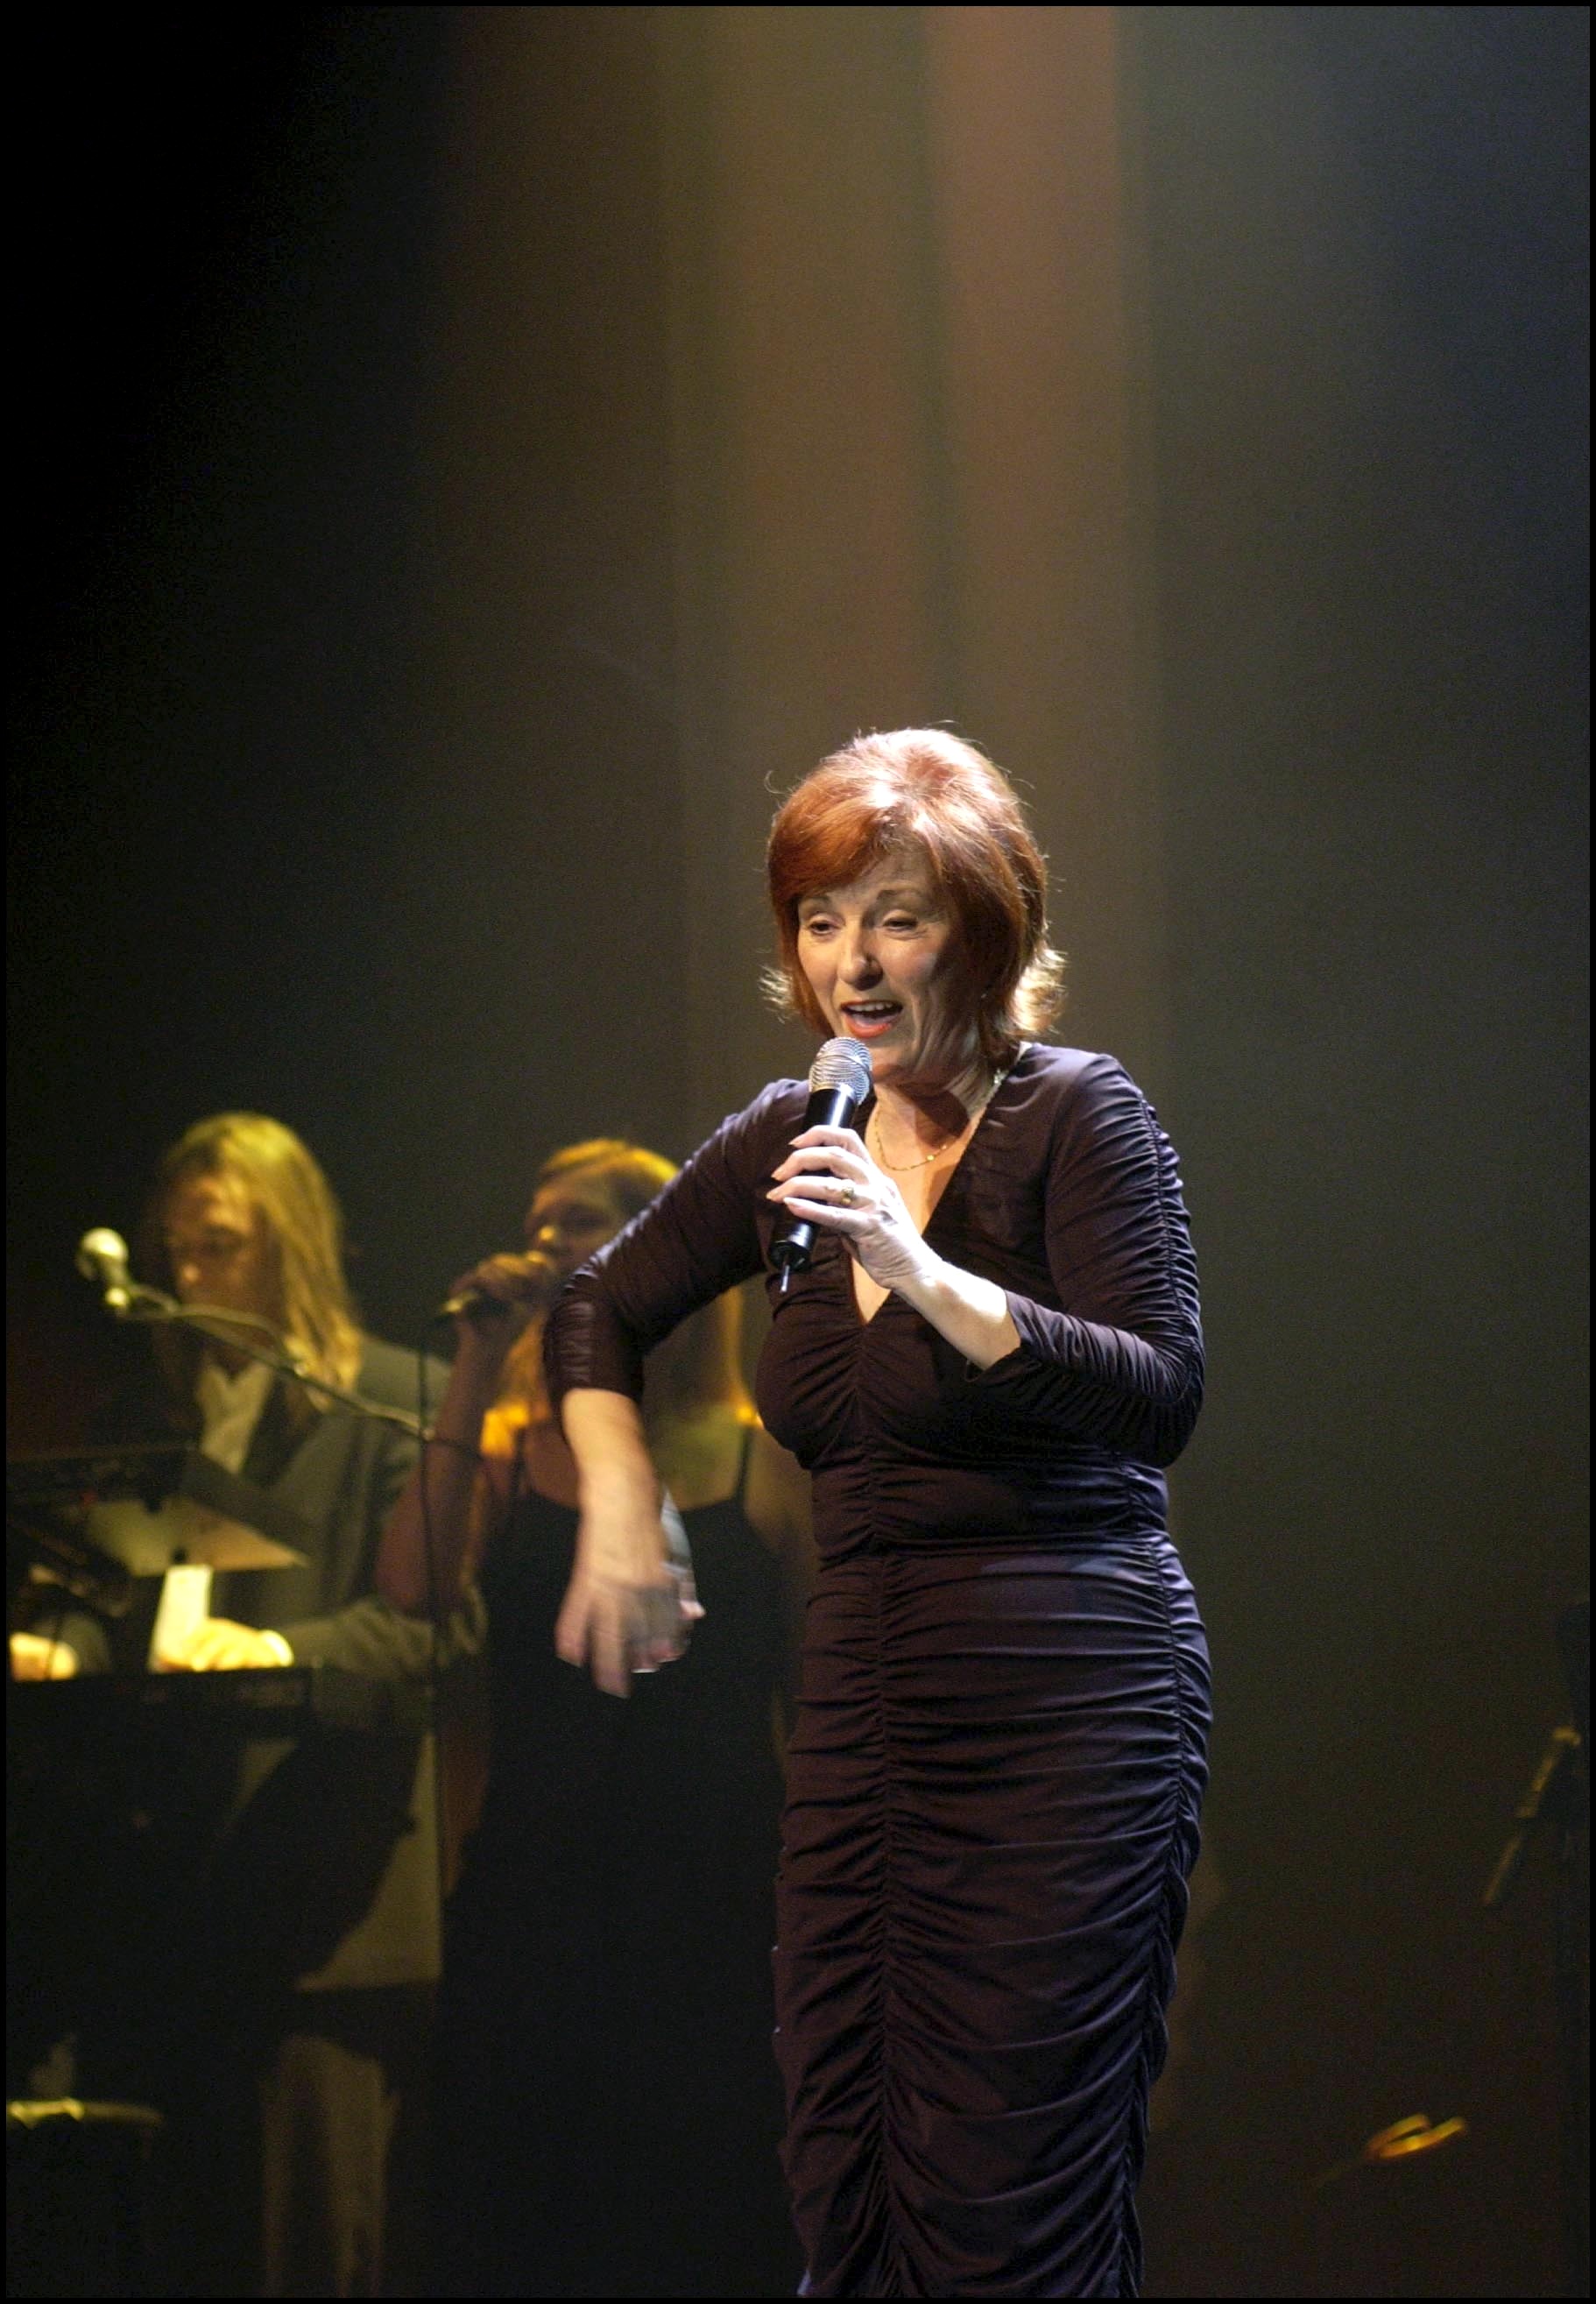 Claudette Dion in Montreal, Canada on October 11, 2002 | Source: Getty Images